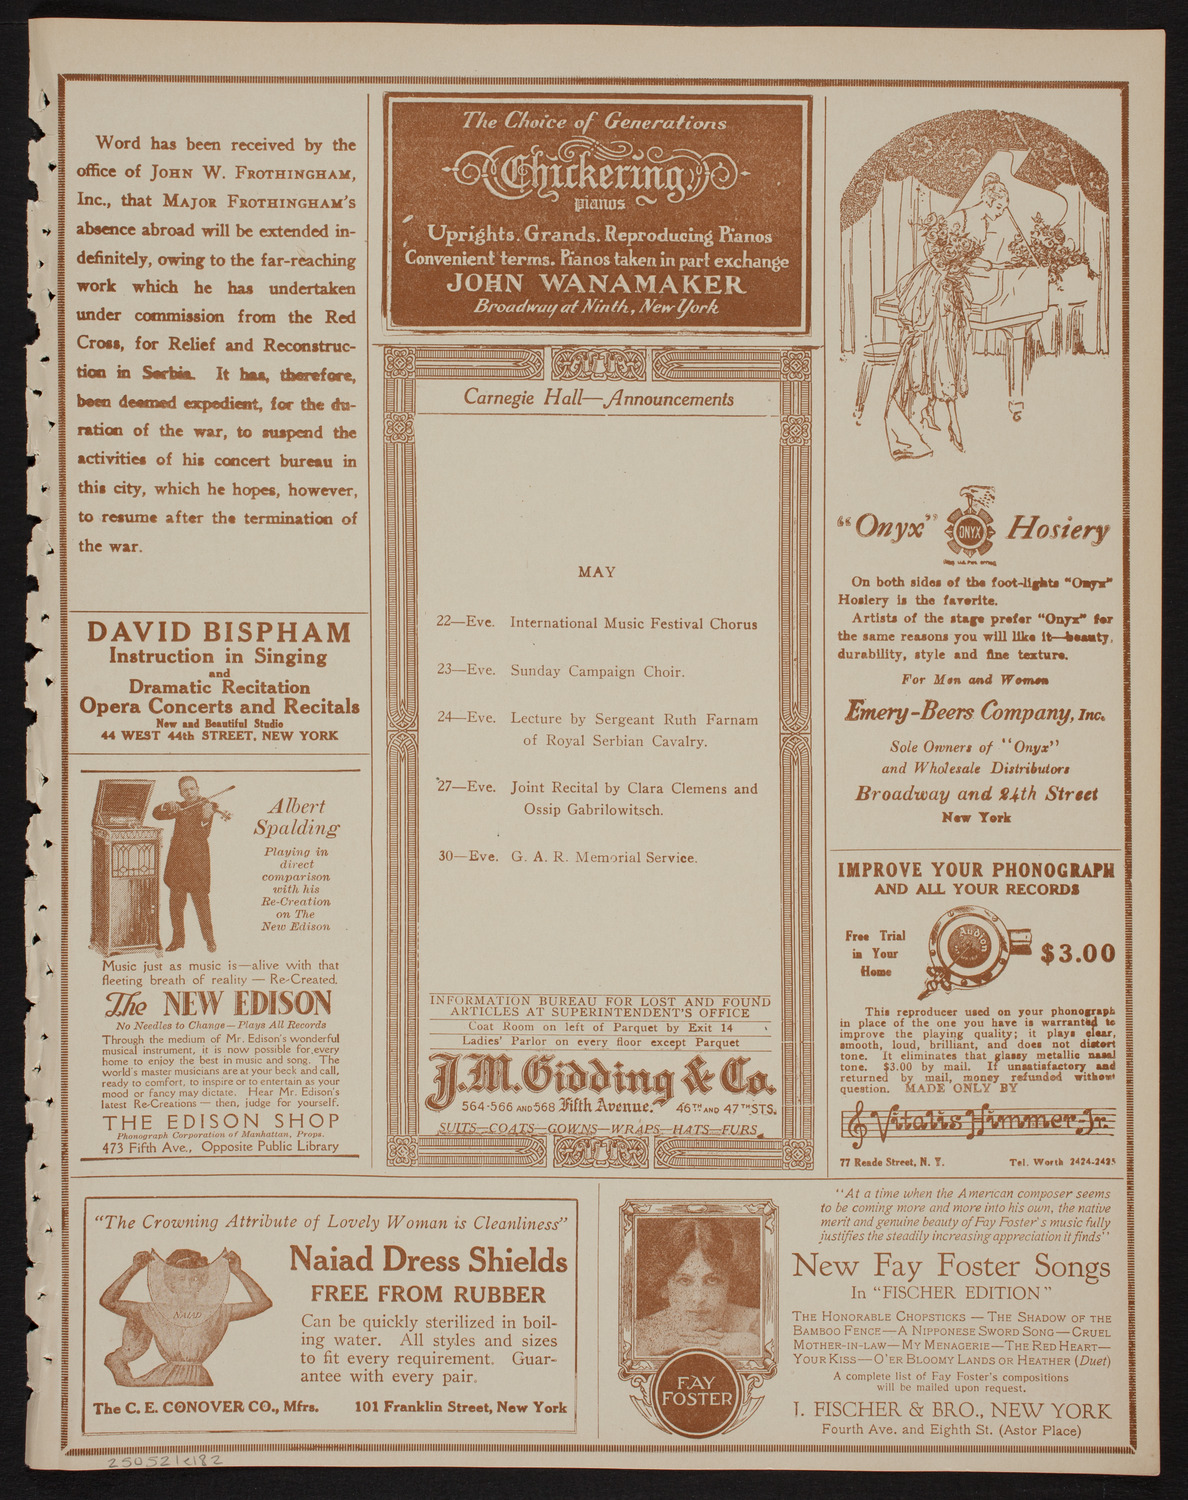 Benefit: Greek-American Institute of New York, May 21, 1918, program page 3